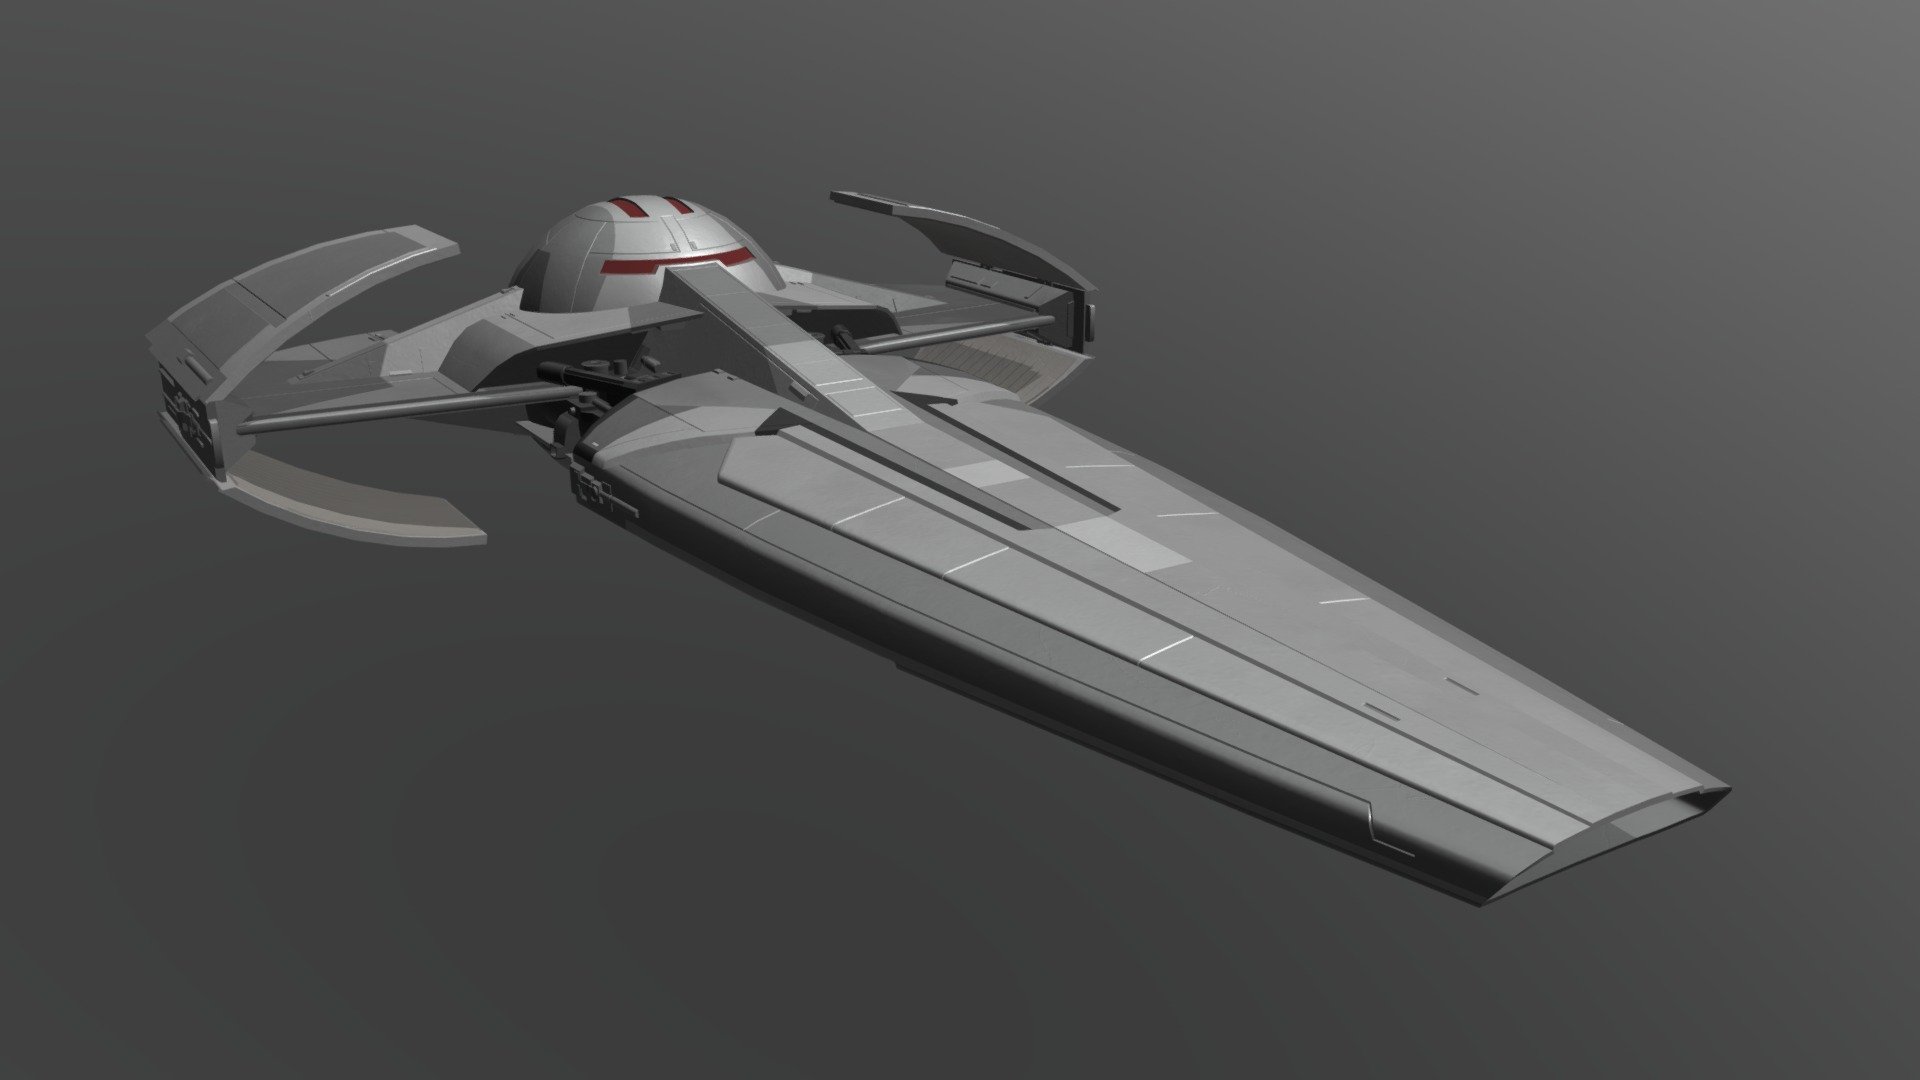 Darth Maul's Sith Infiltrator from Star Wars: The Phantom Menace.

Haven't found any other models of this ship on this site, which was not my reason for making it but here's my admittedly rather amateur attempt.

Made in Blender 3d model